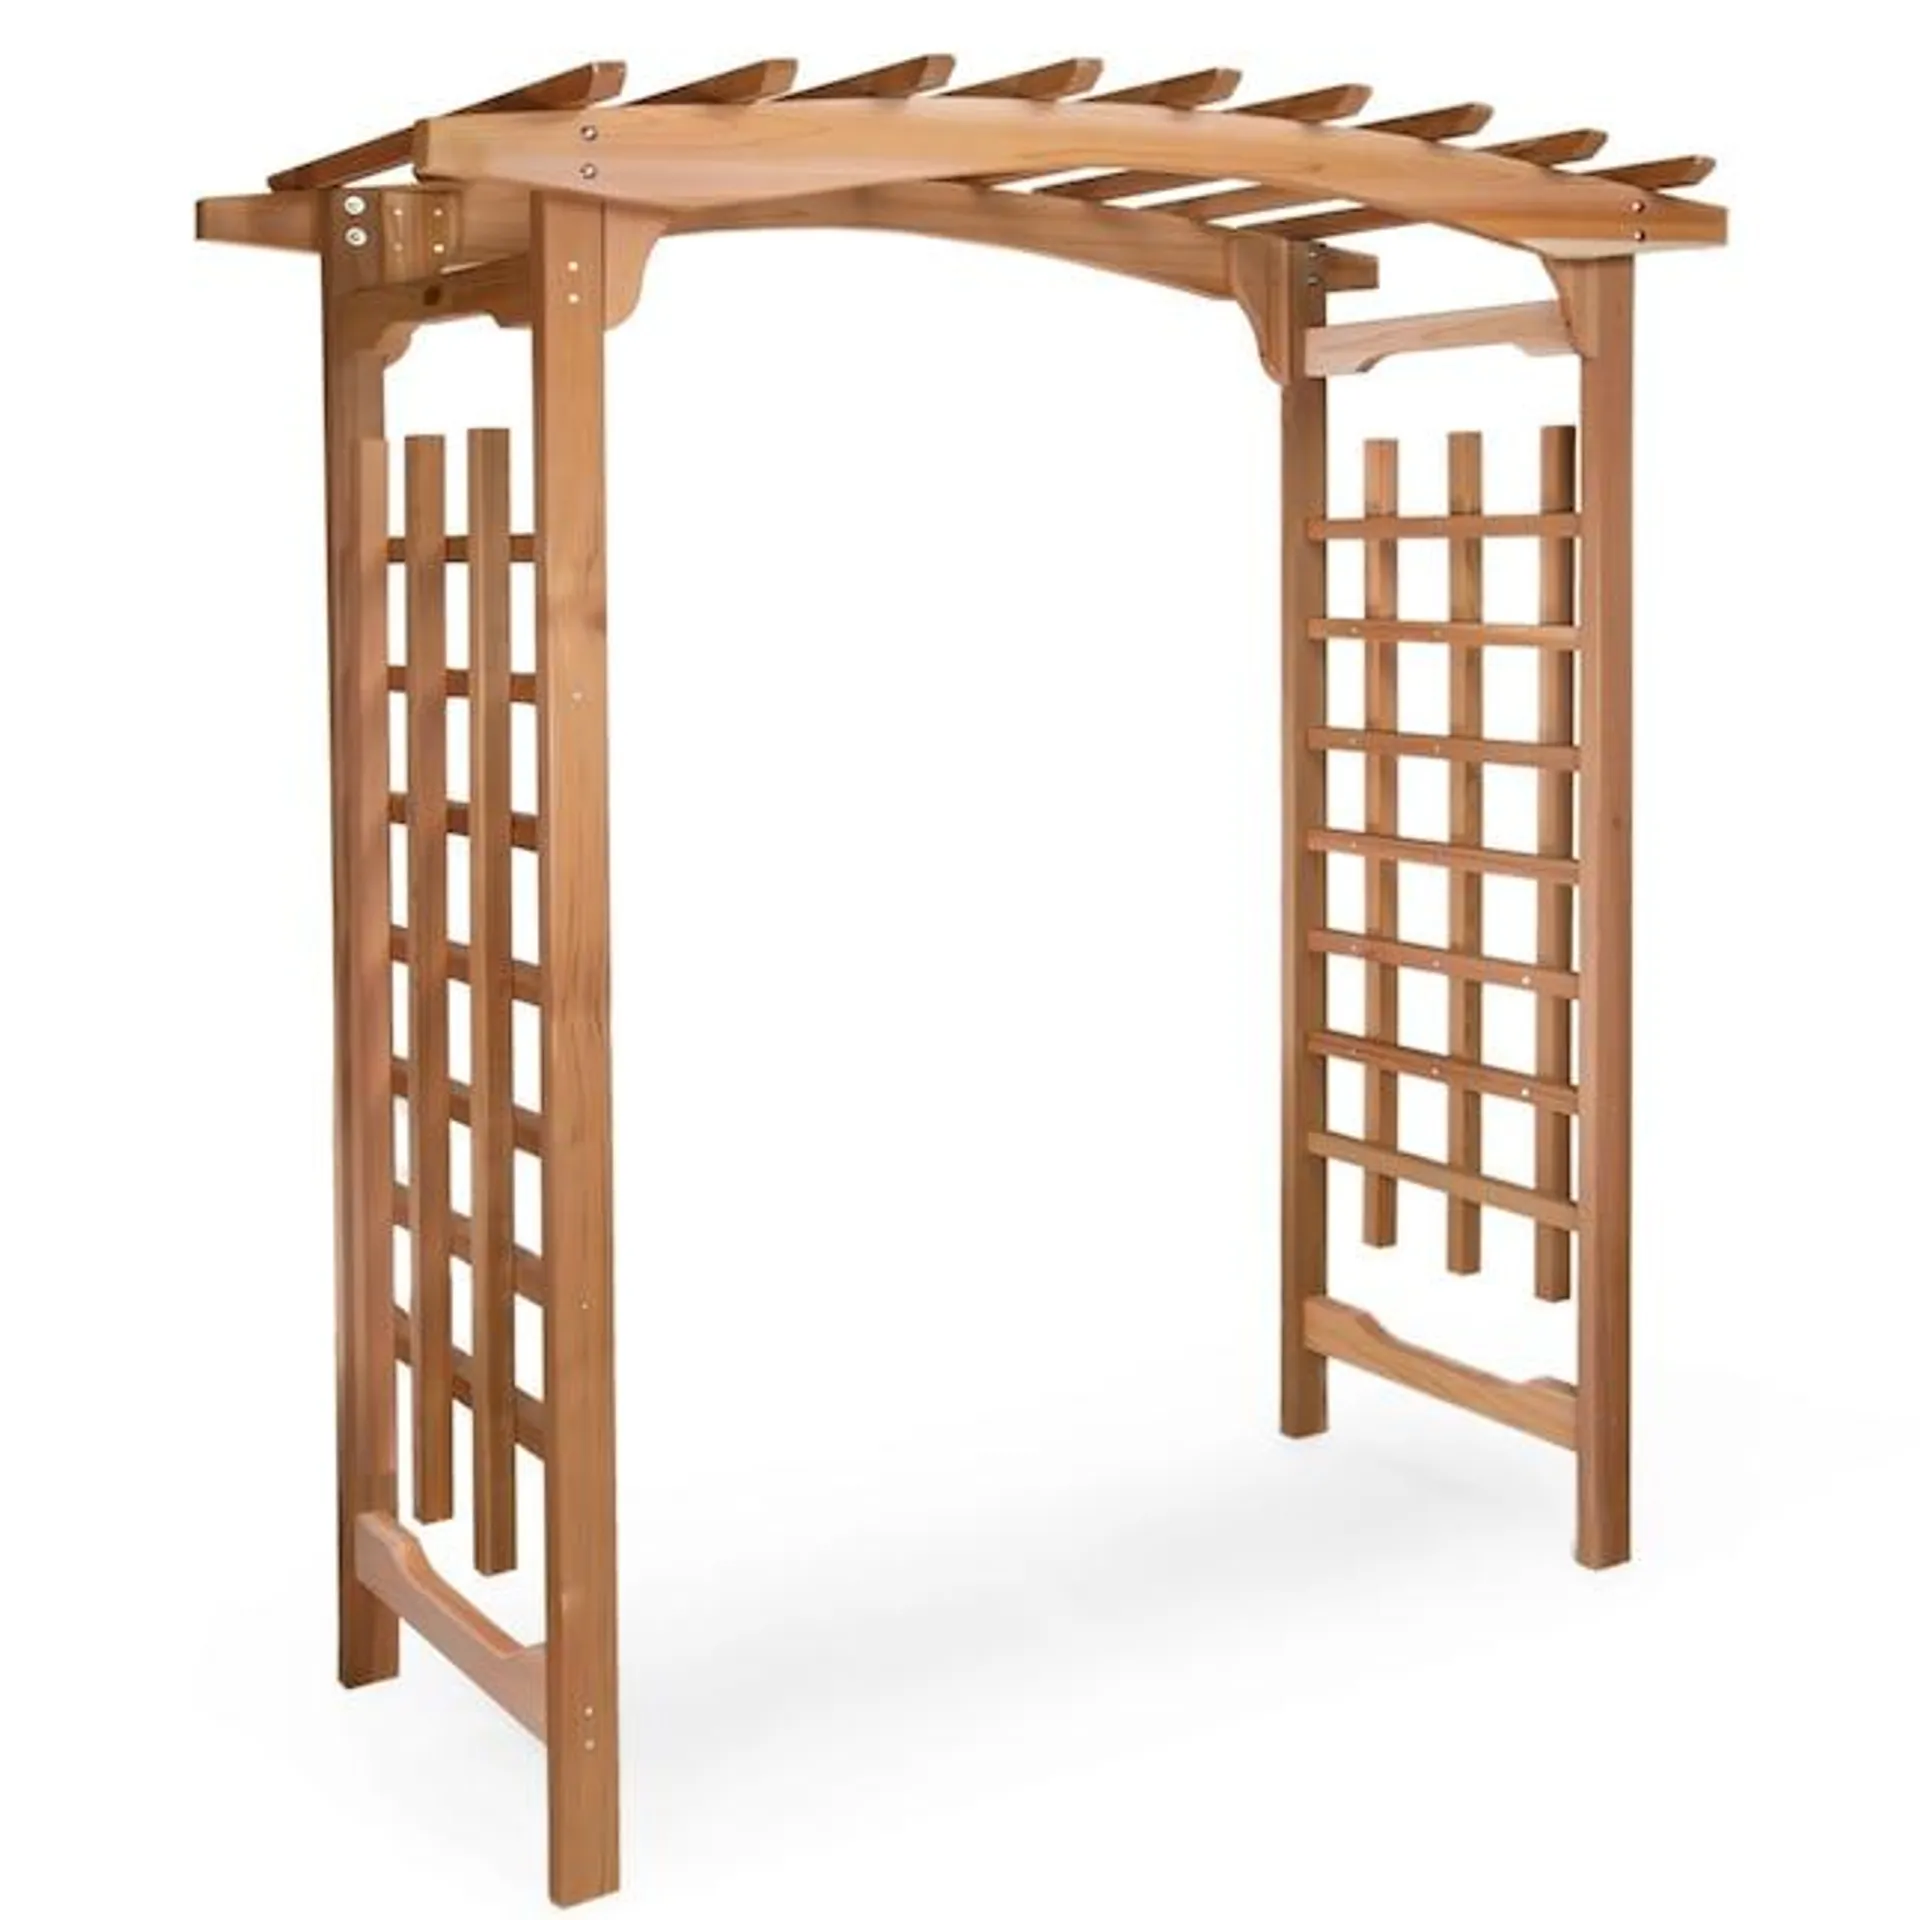 All Things Cedar 5.92-ft W x 7.25-ft H Natural Wood Garden Arbor